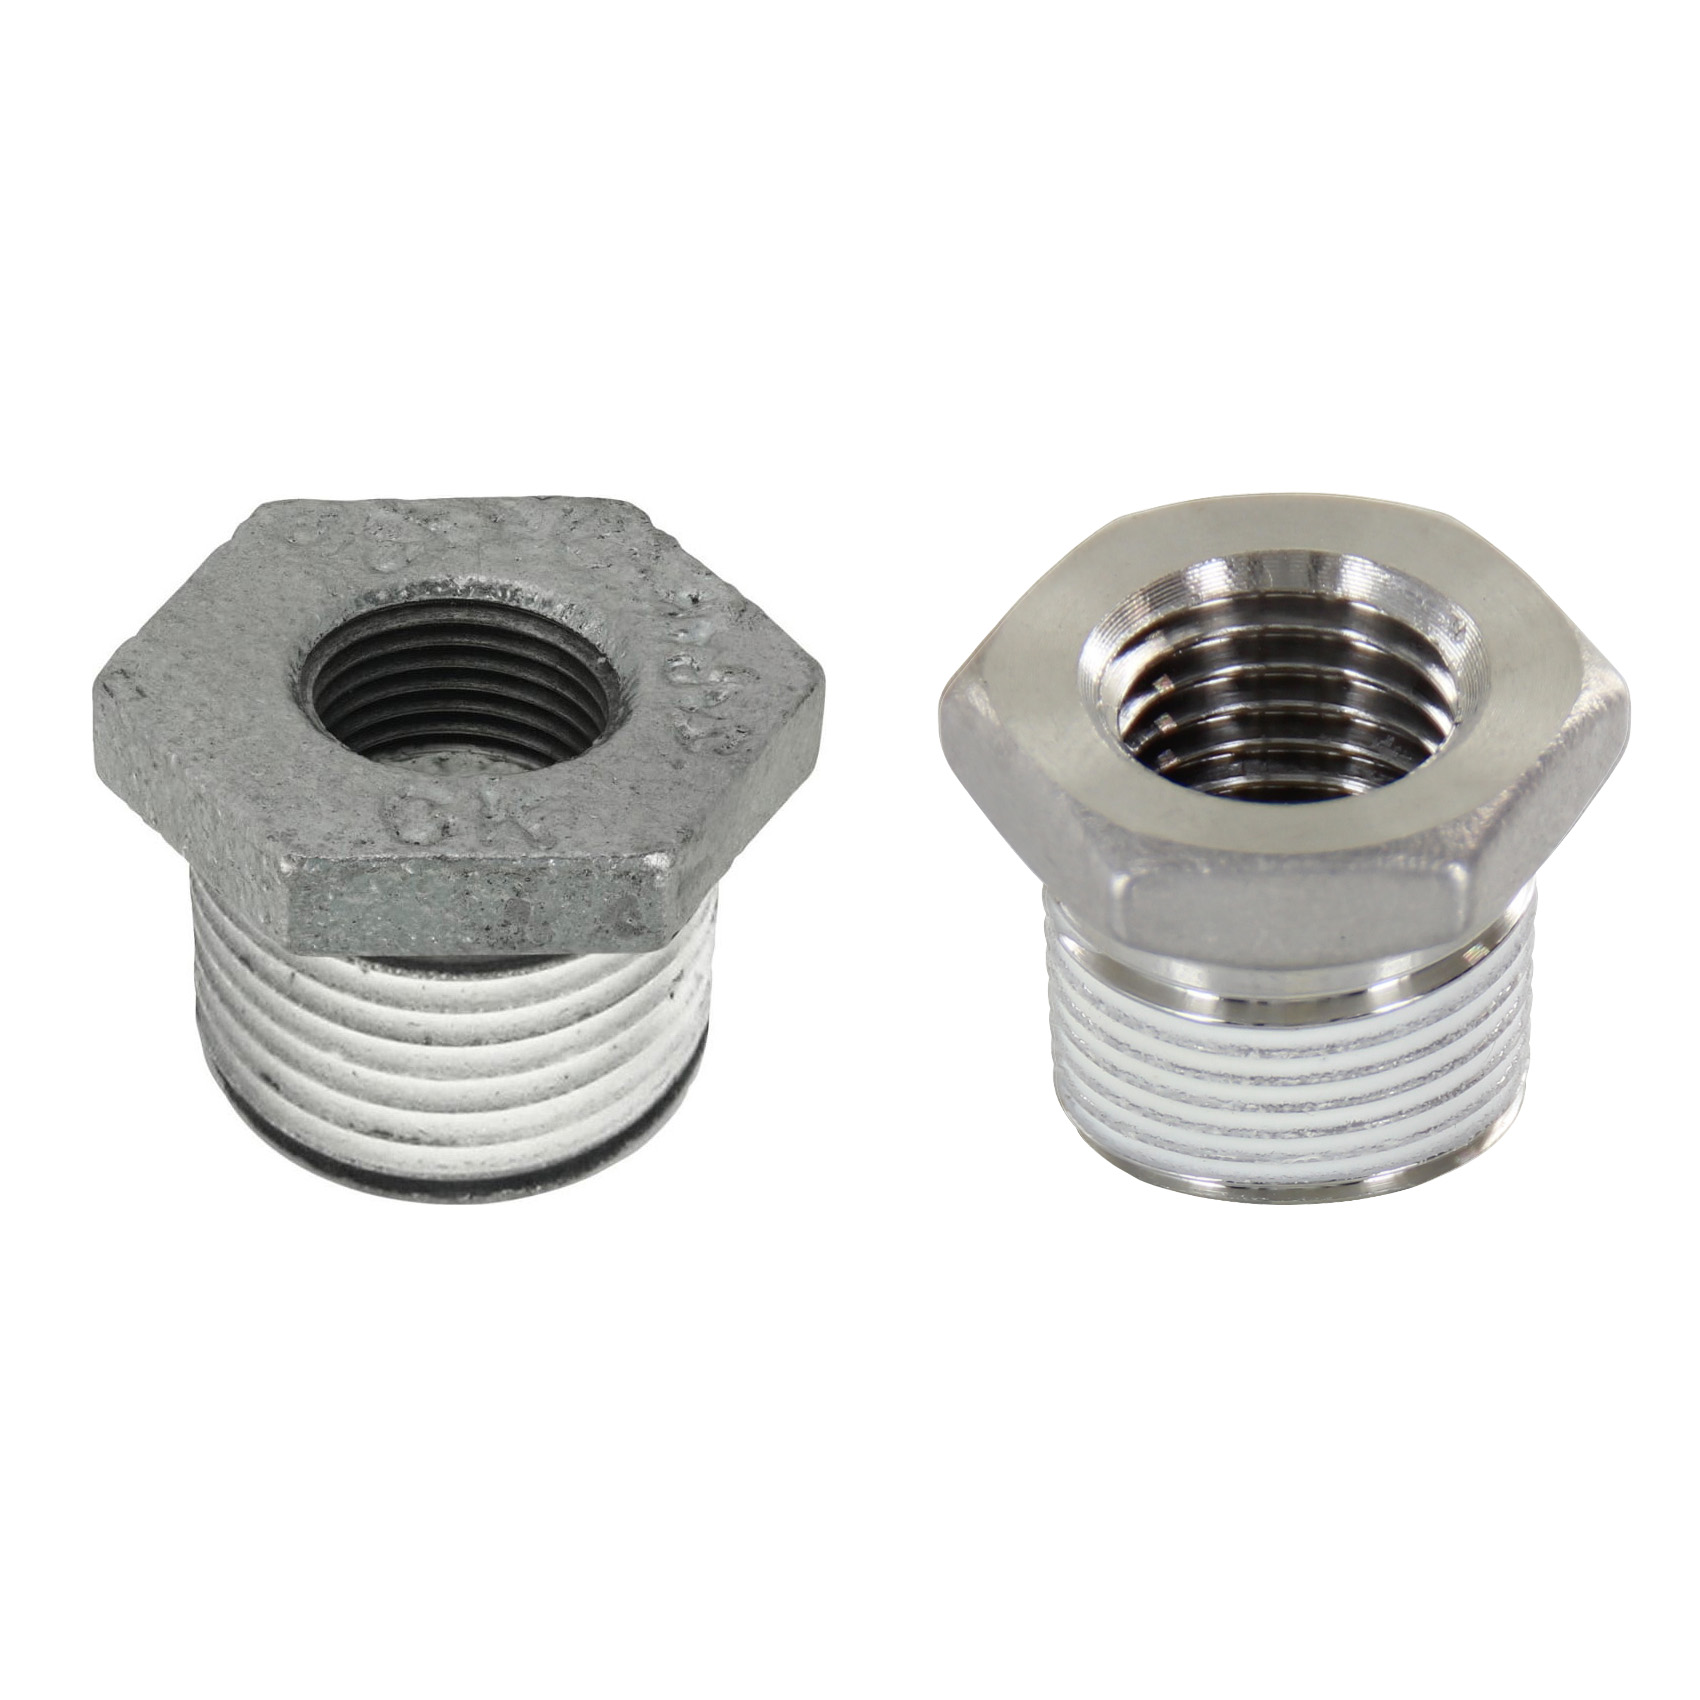 Low Pressure Fittings / With Seal Coating / Bushing SGCPB46